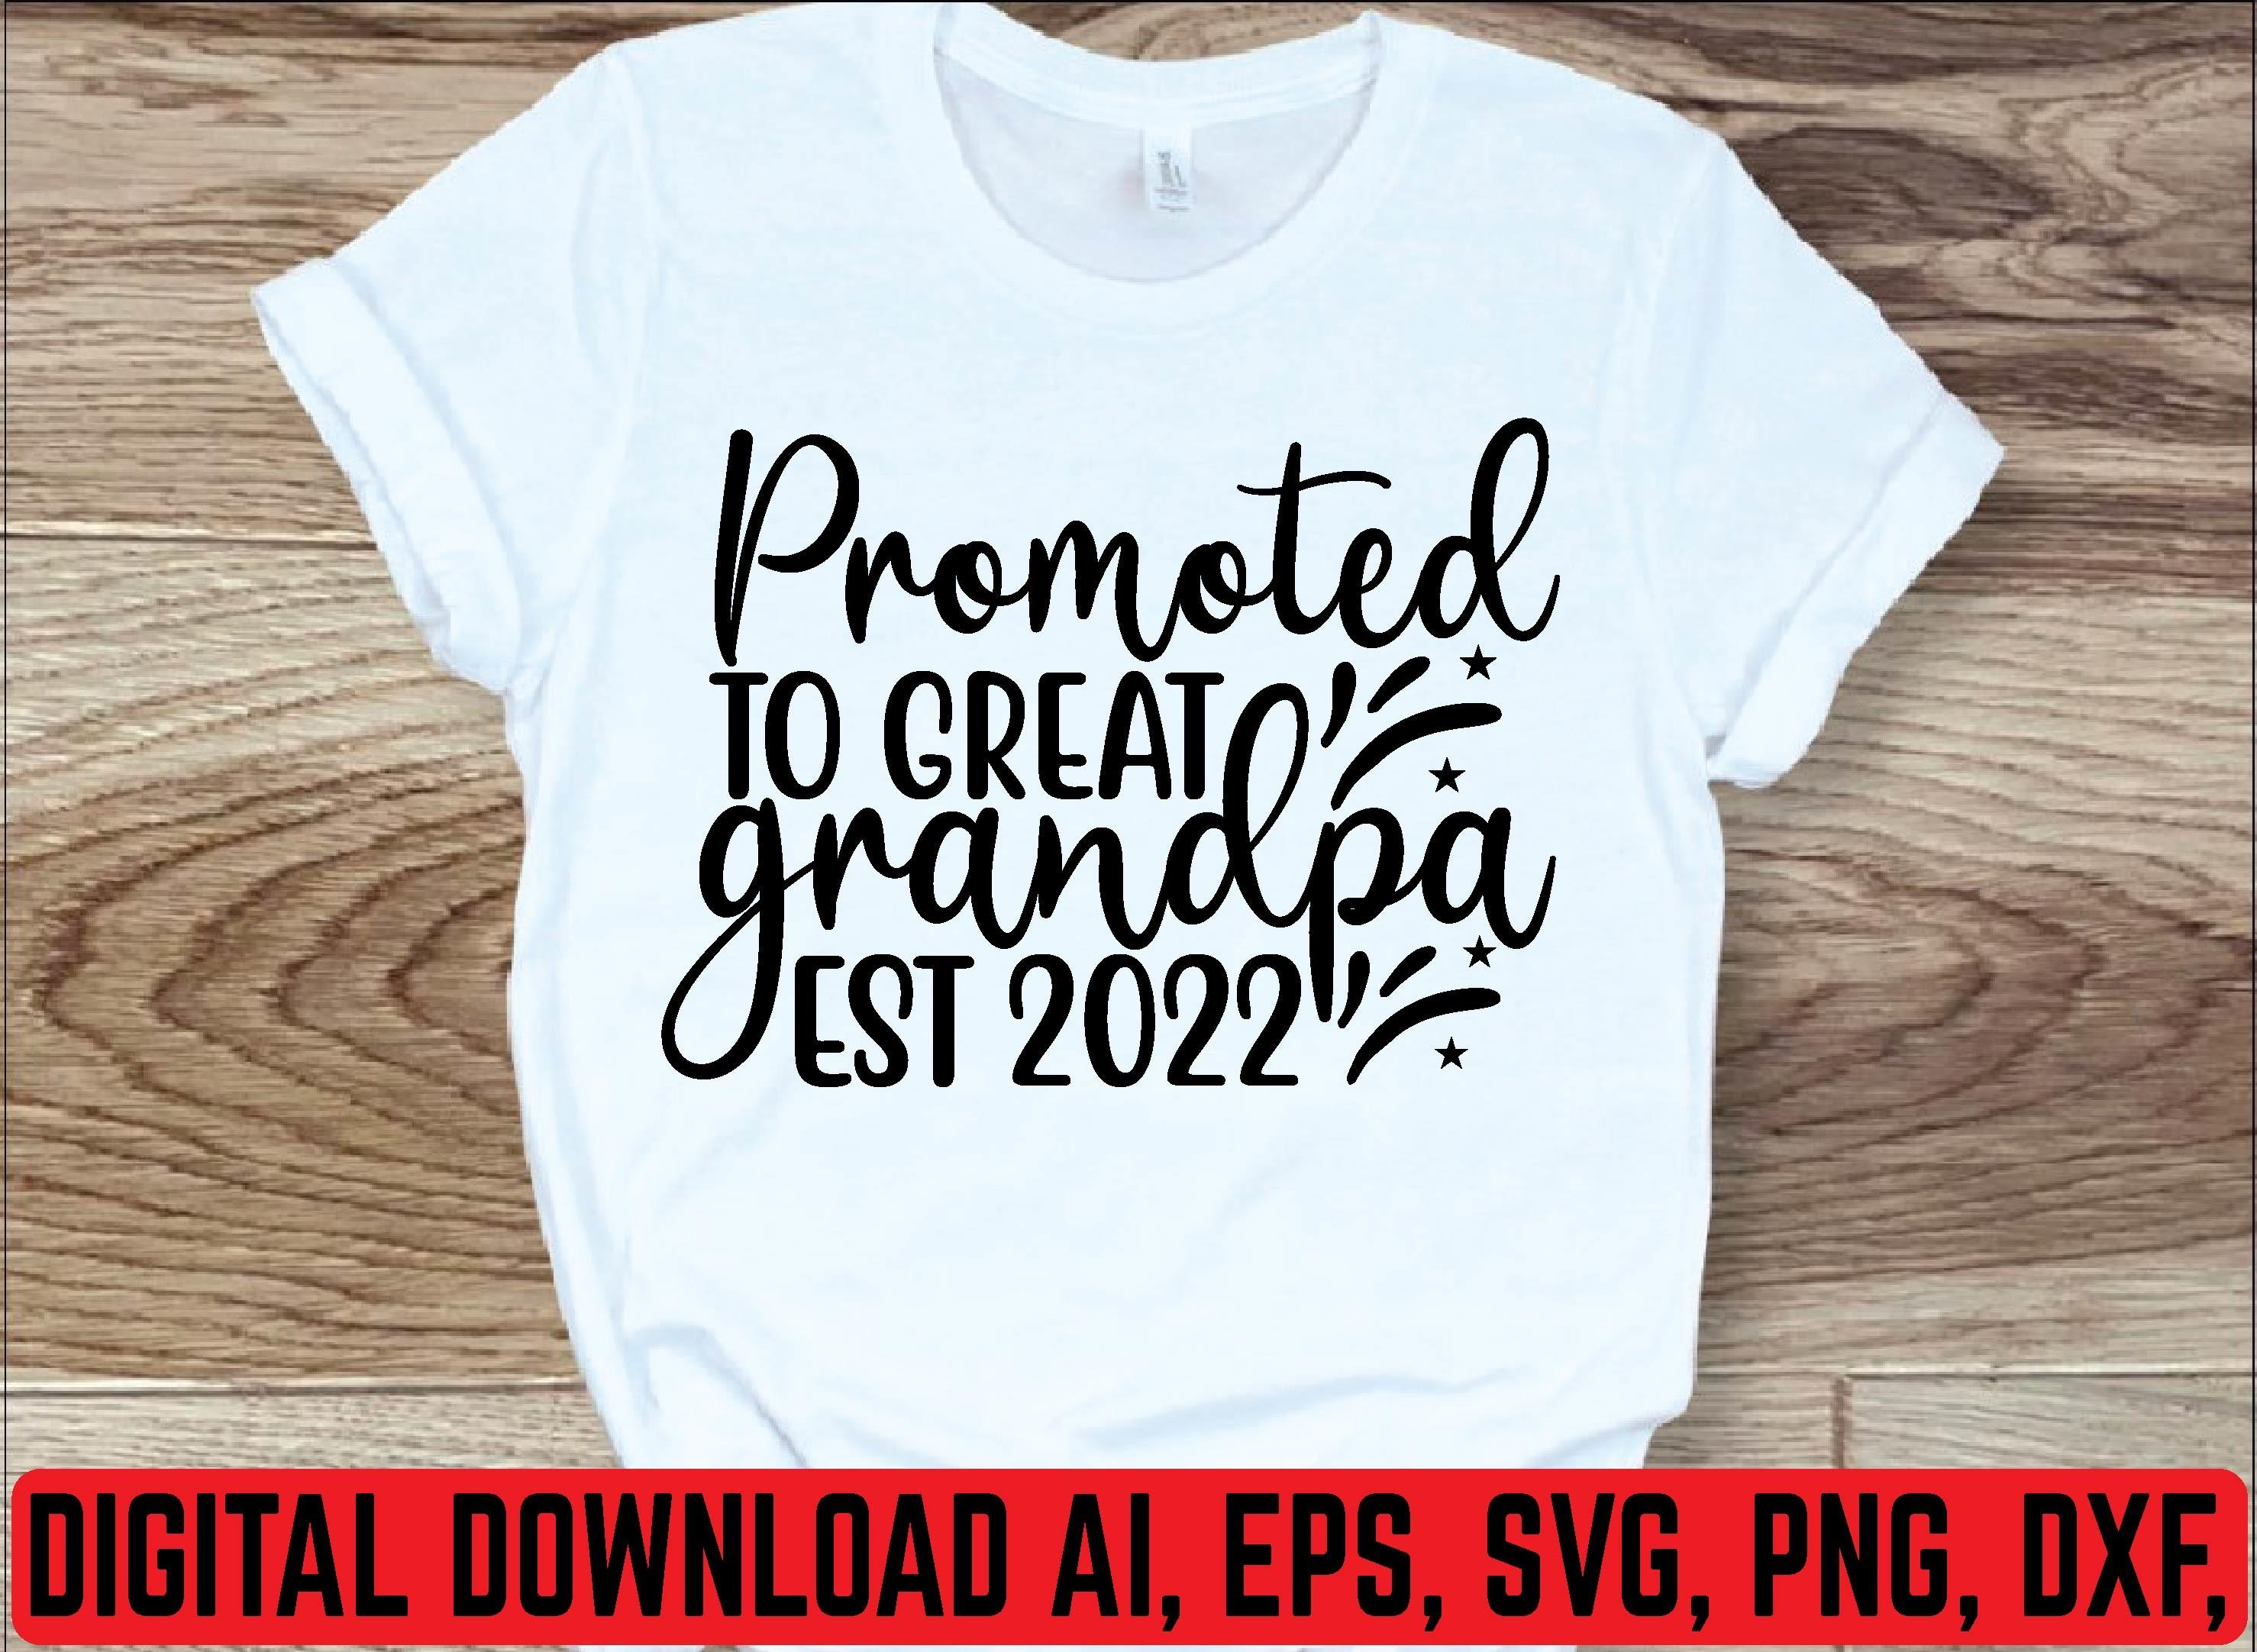 Promoted to Great Grandpa Est 2022 Svg